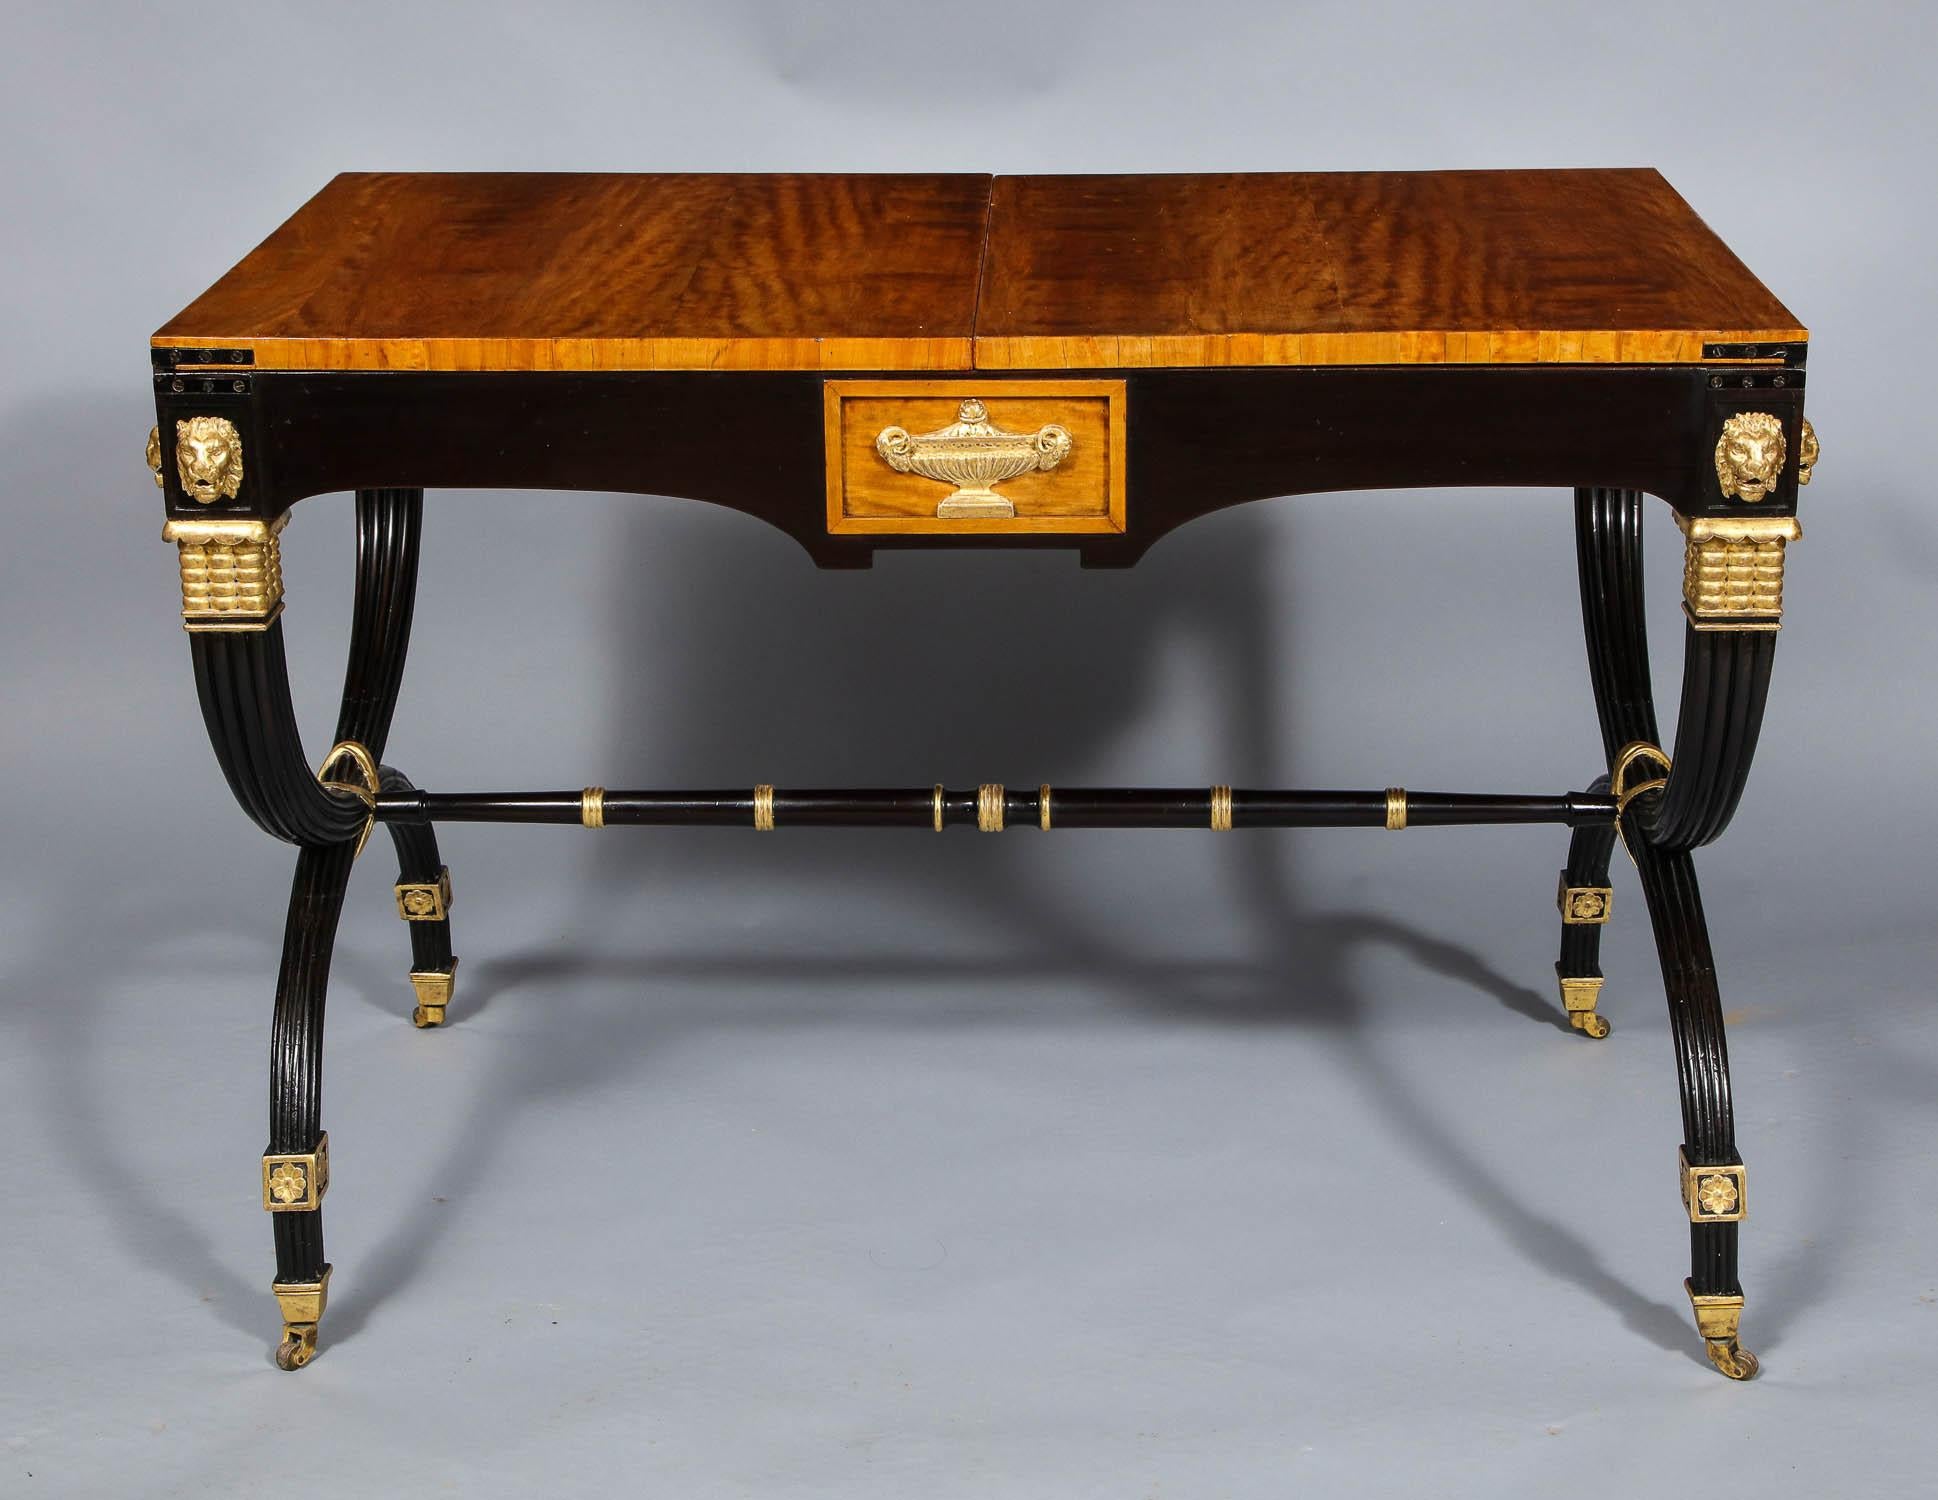 Fine satinwood, gilt and ebonized extending table in the manner of John McClean, circa 1890, having well figured top over ebonized shaped apron with gilt lion and urn mounts, standing on ribbed curule legs with gilt bands and standing on brass